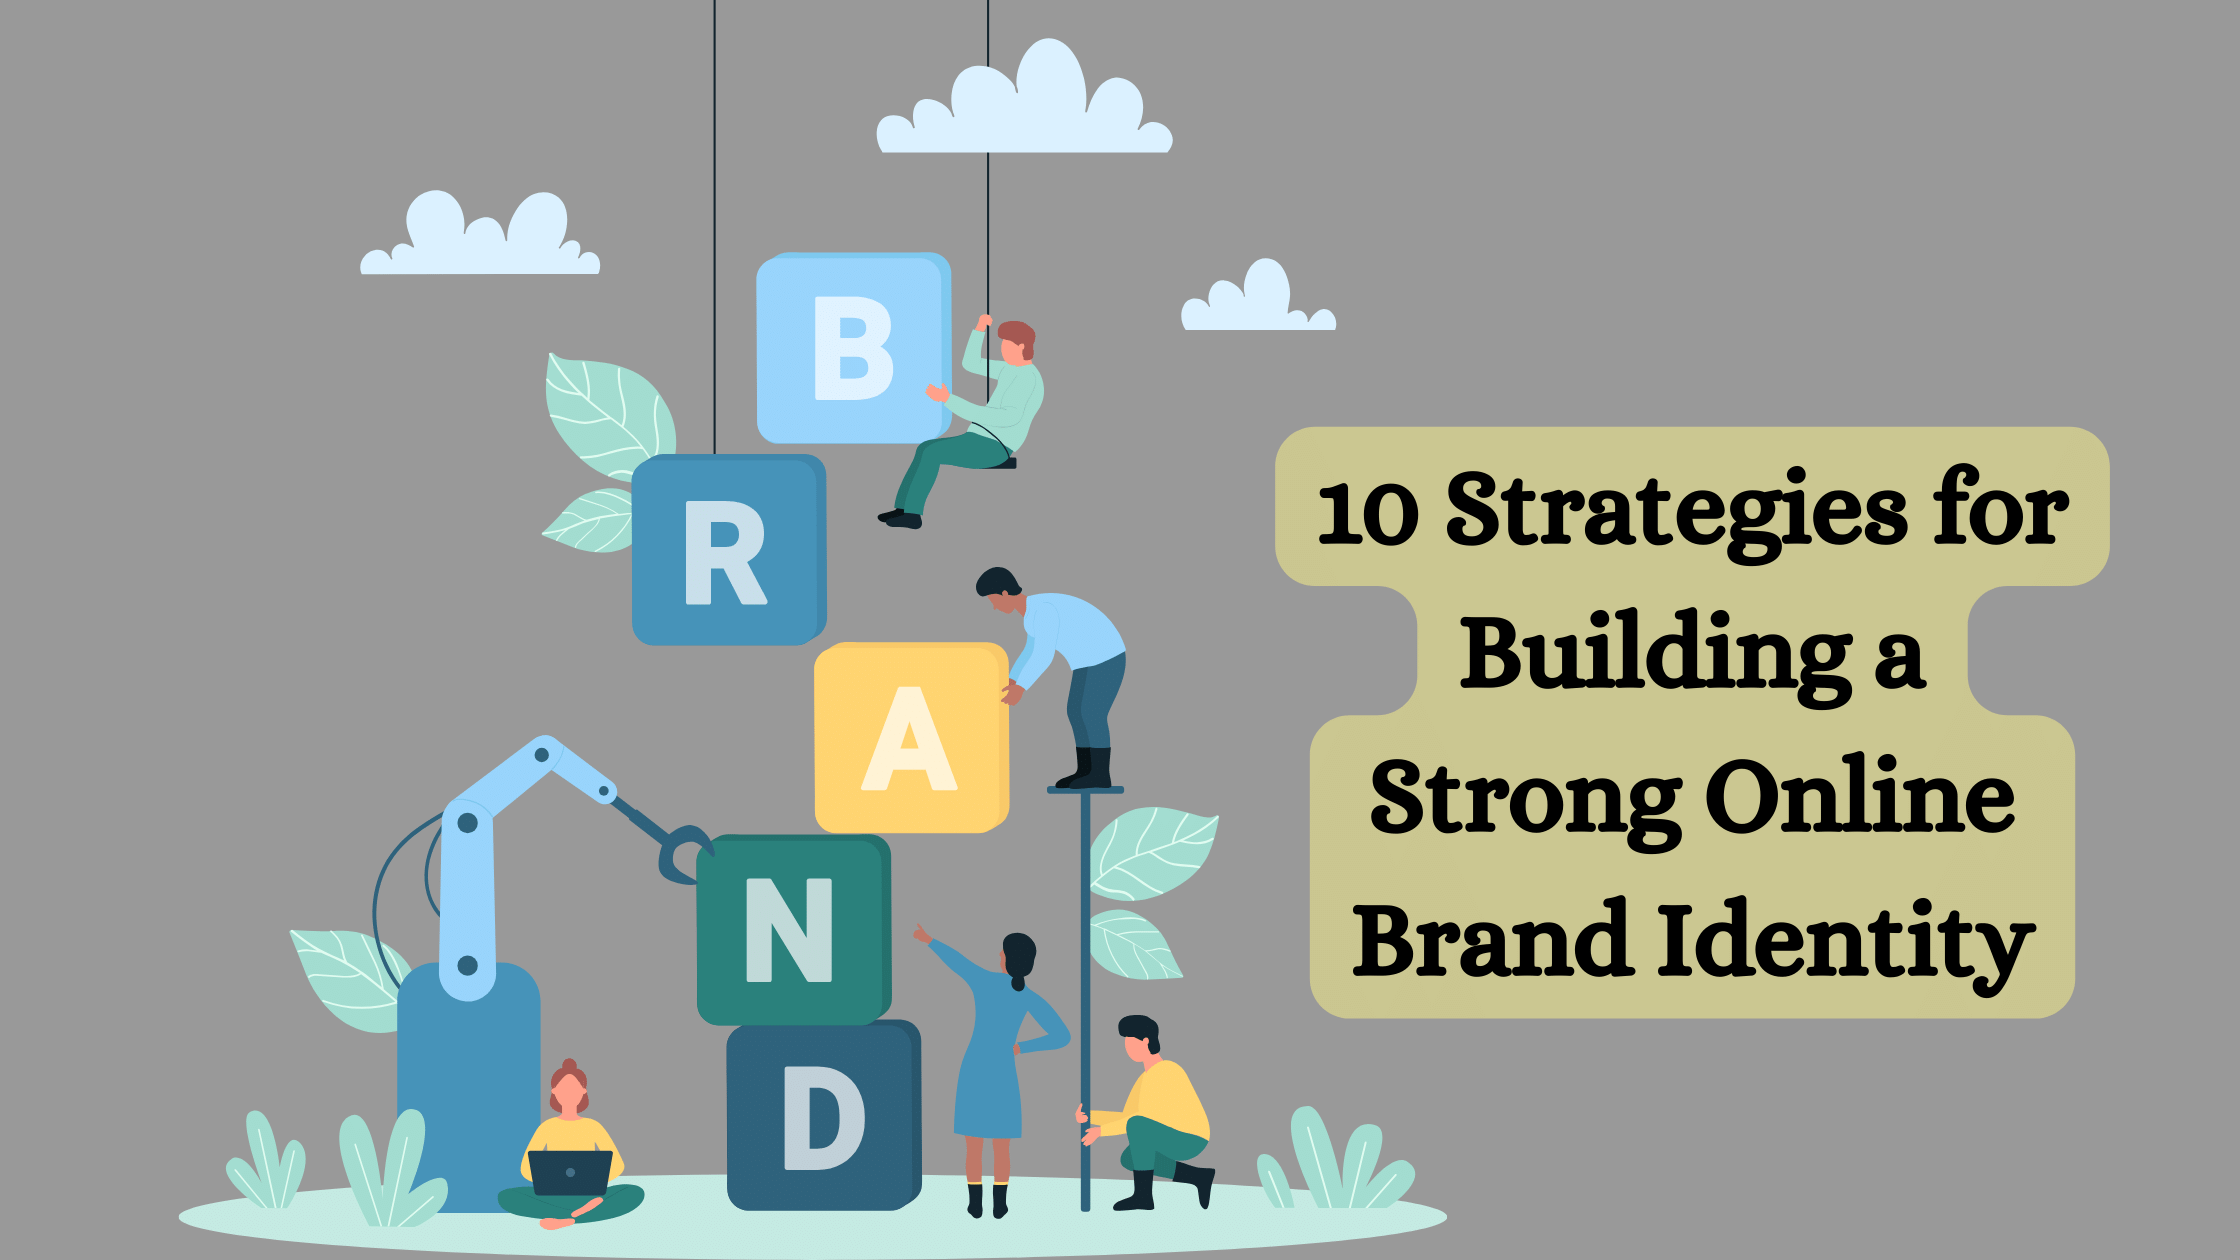 Building a Strong Online Brand Identity